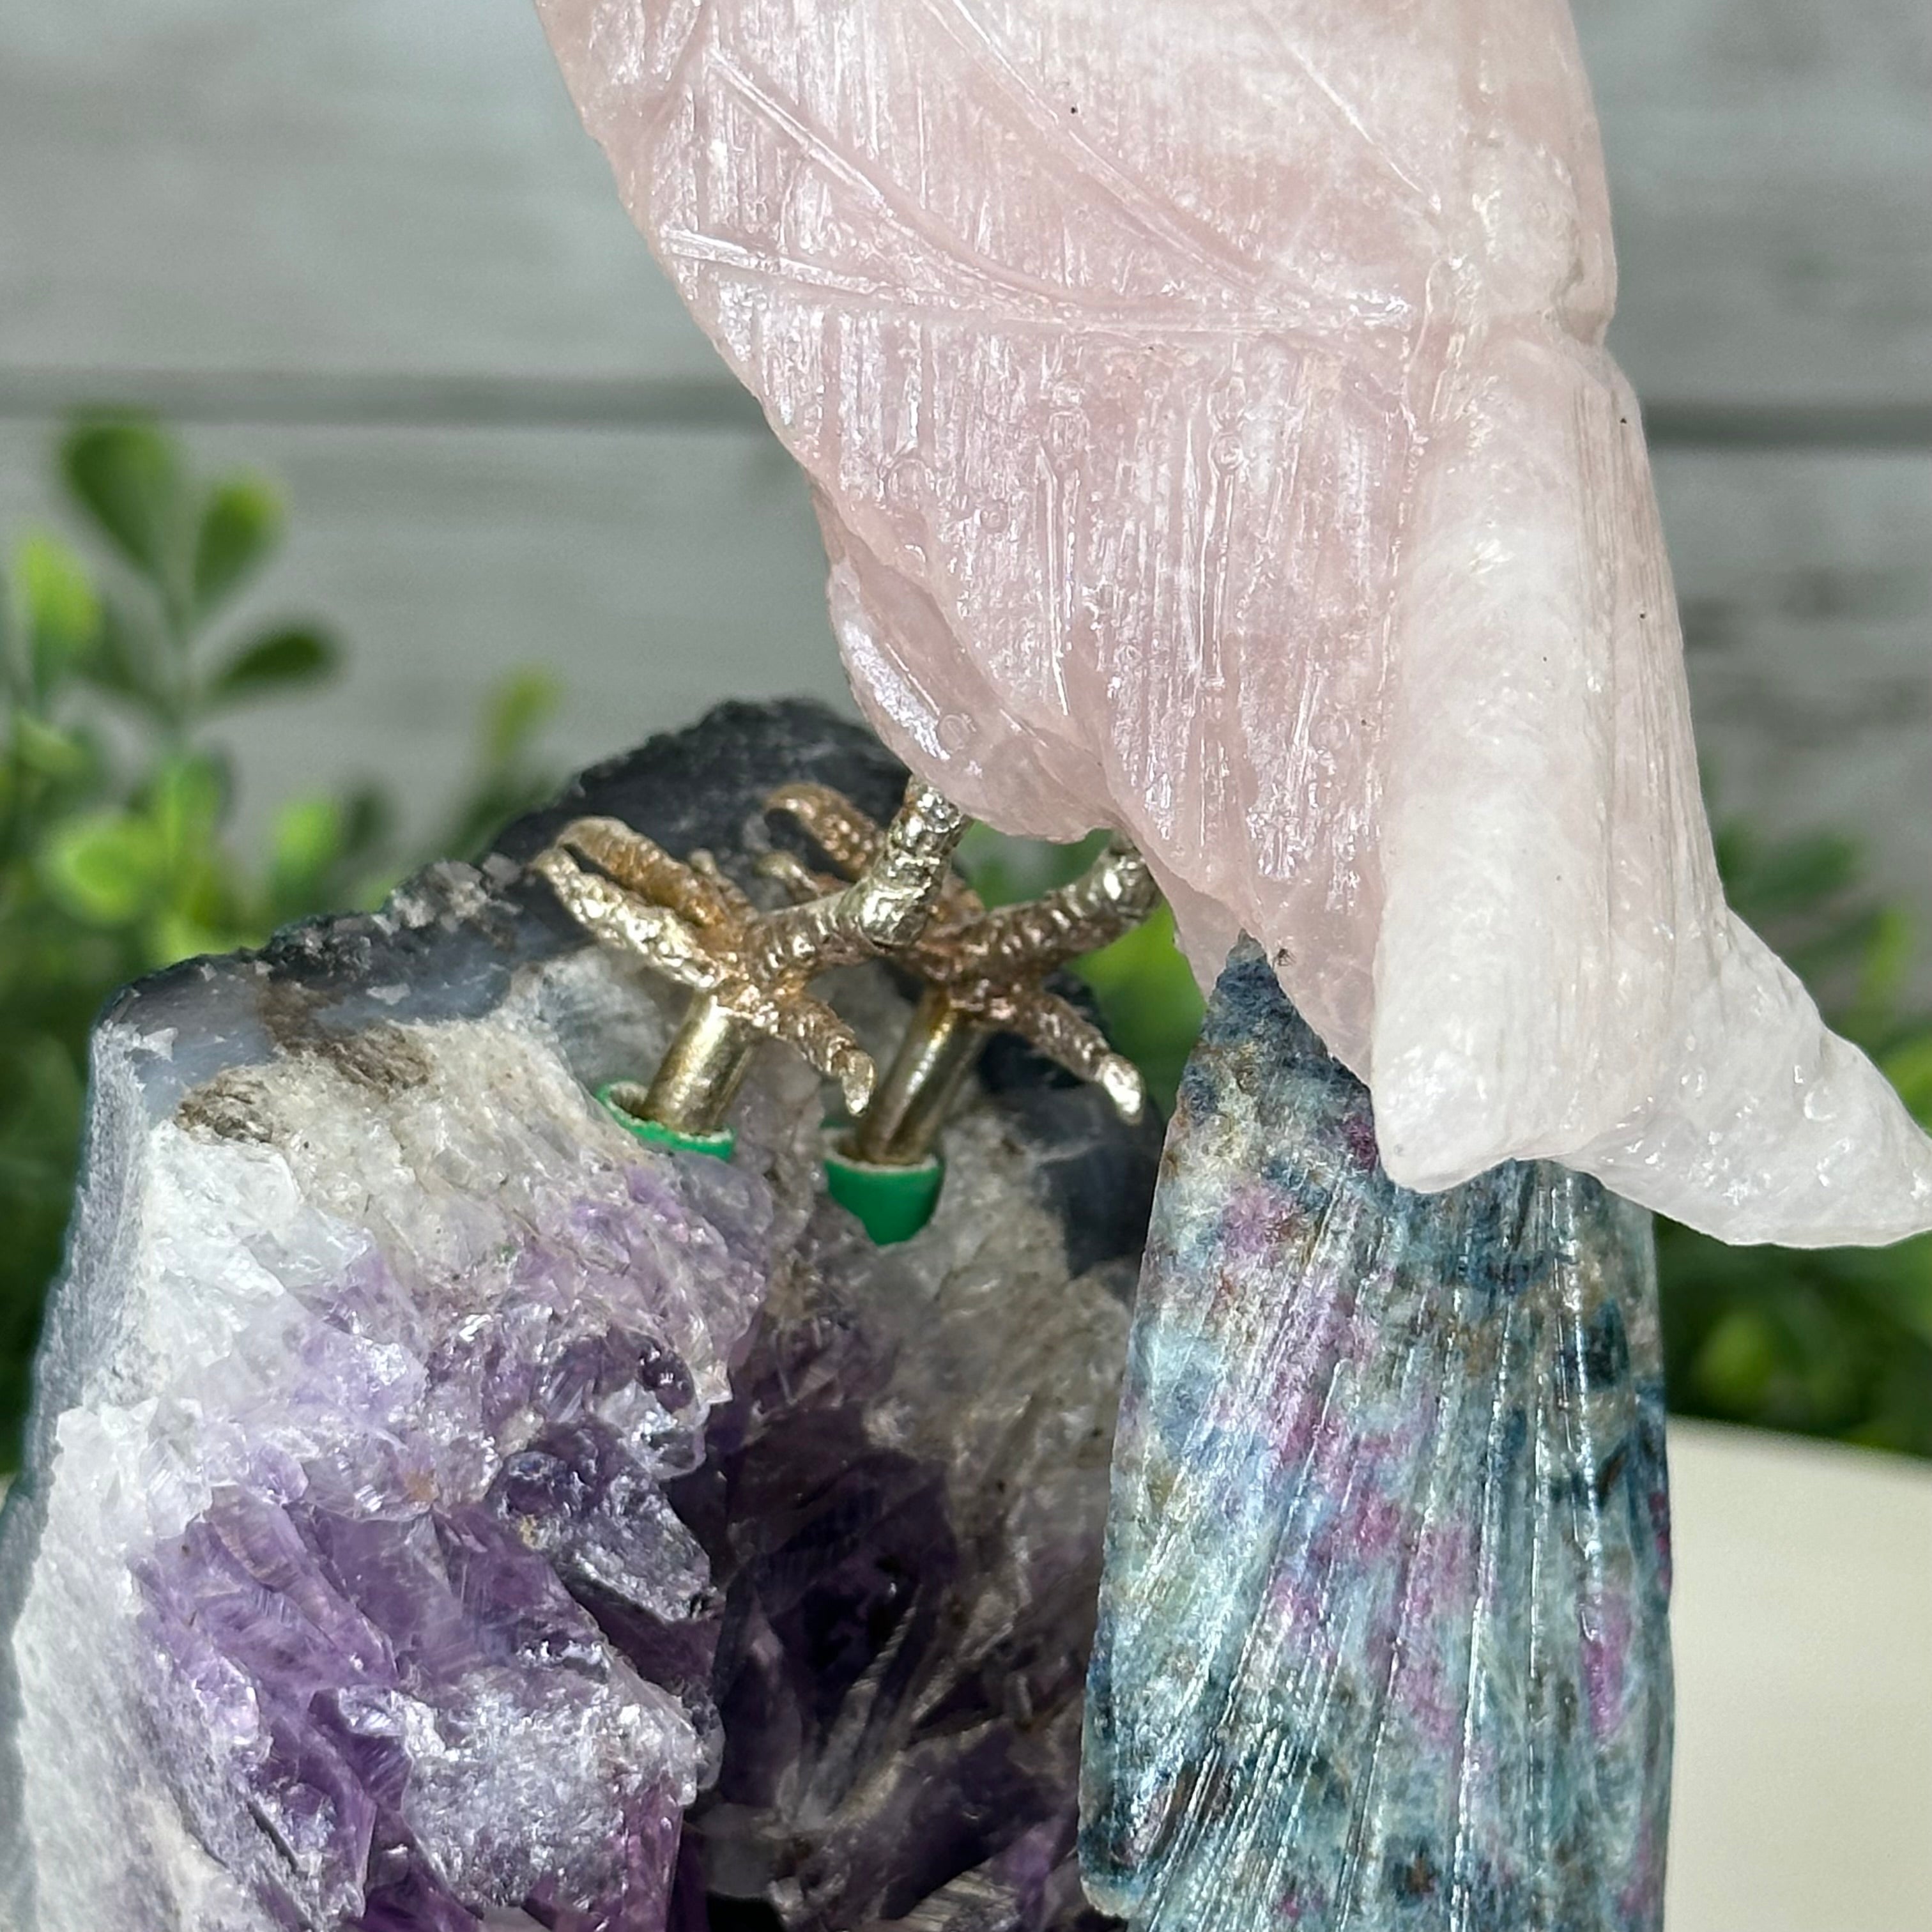 Hand-Carved Gemstone Cockatoo on a Crystal Cluster #3004-RQCAM-043